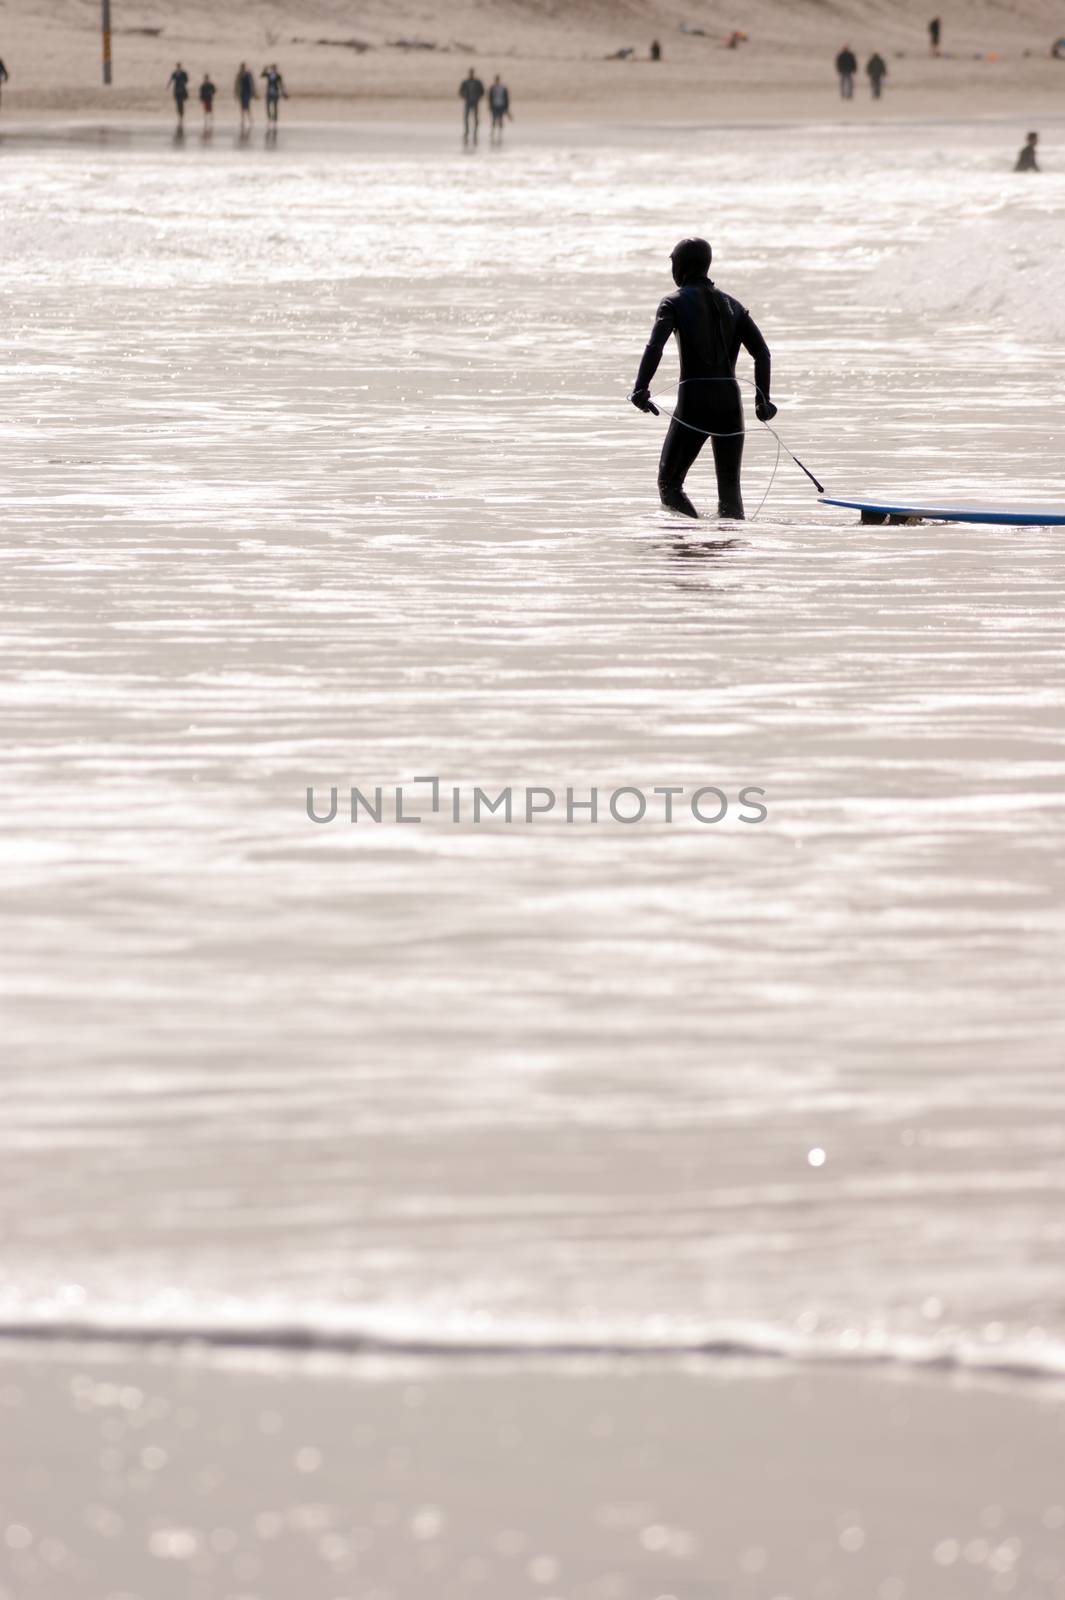 Surfer Wearing Wetsuit Pulls Surf Board After Surfing Session by ChrisBoswell